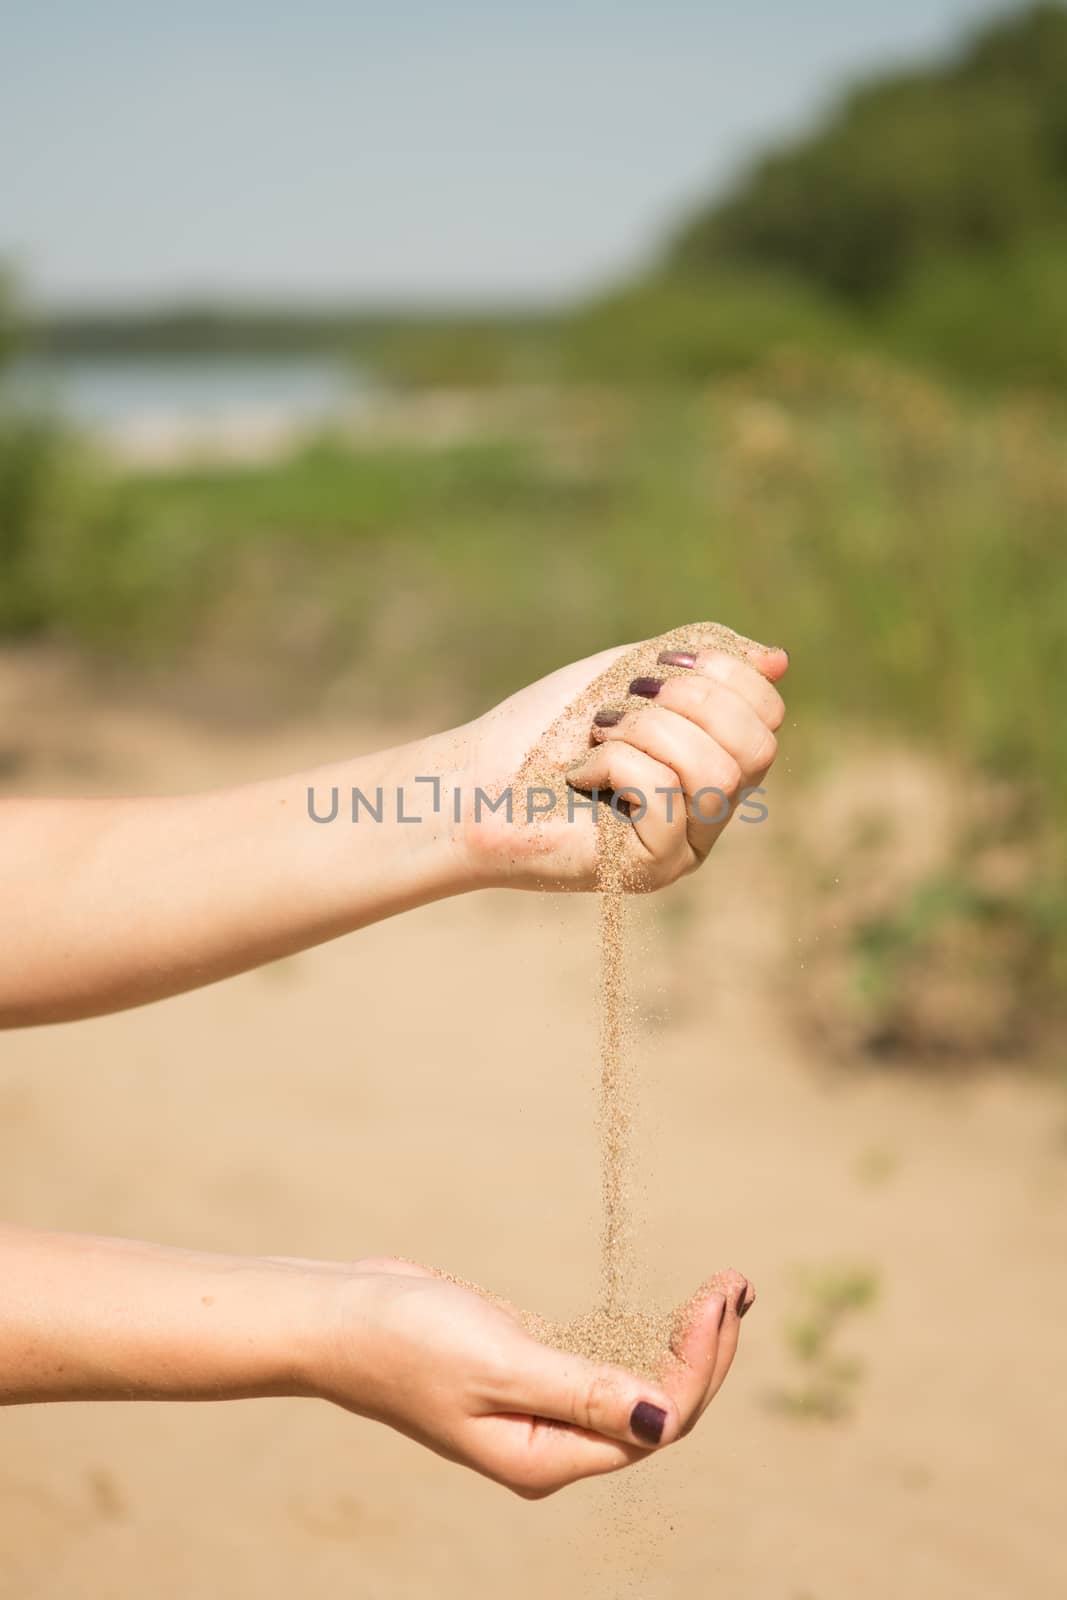 sand running through hands of woman in the beach